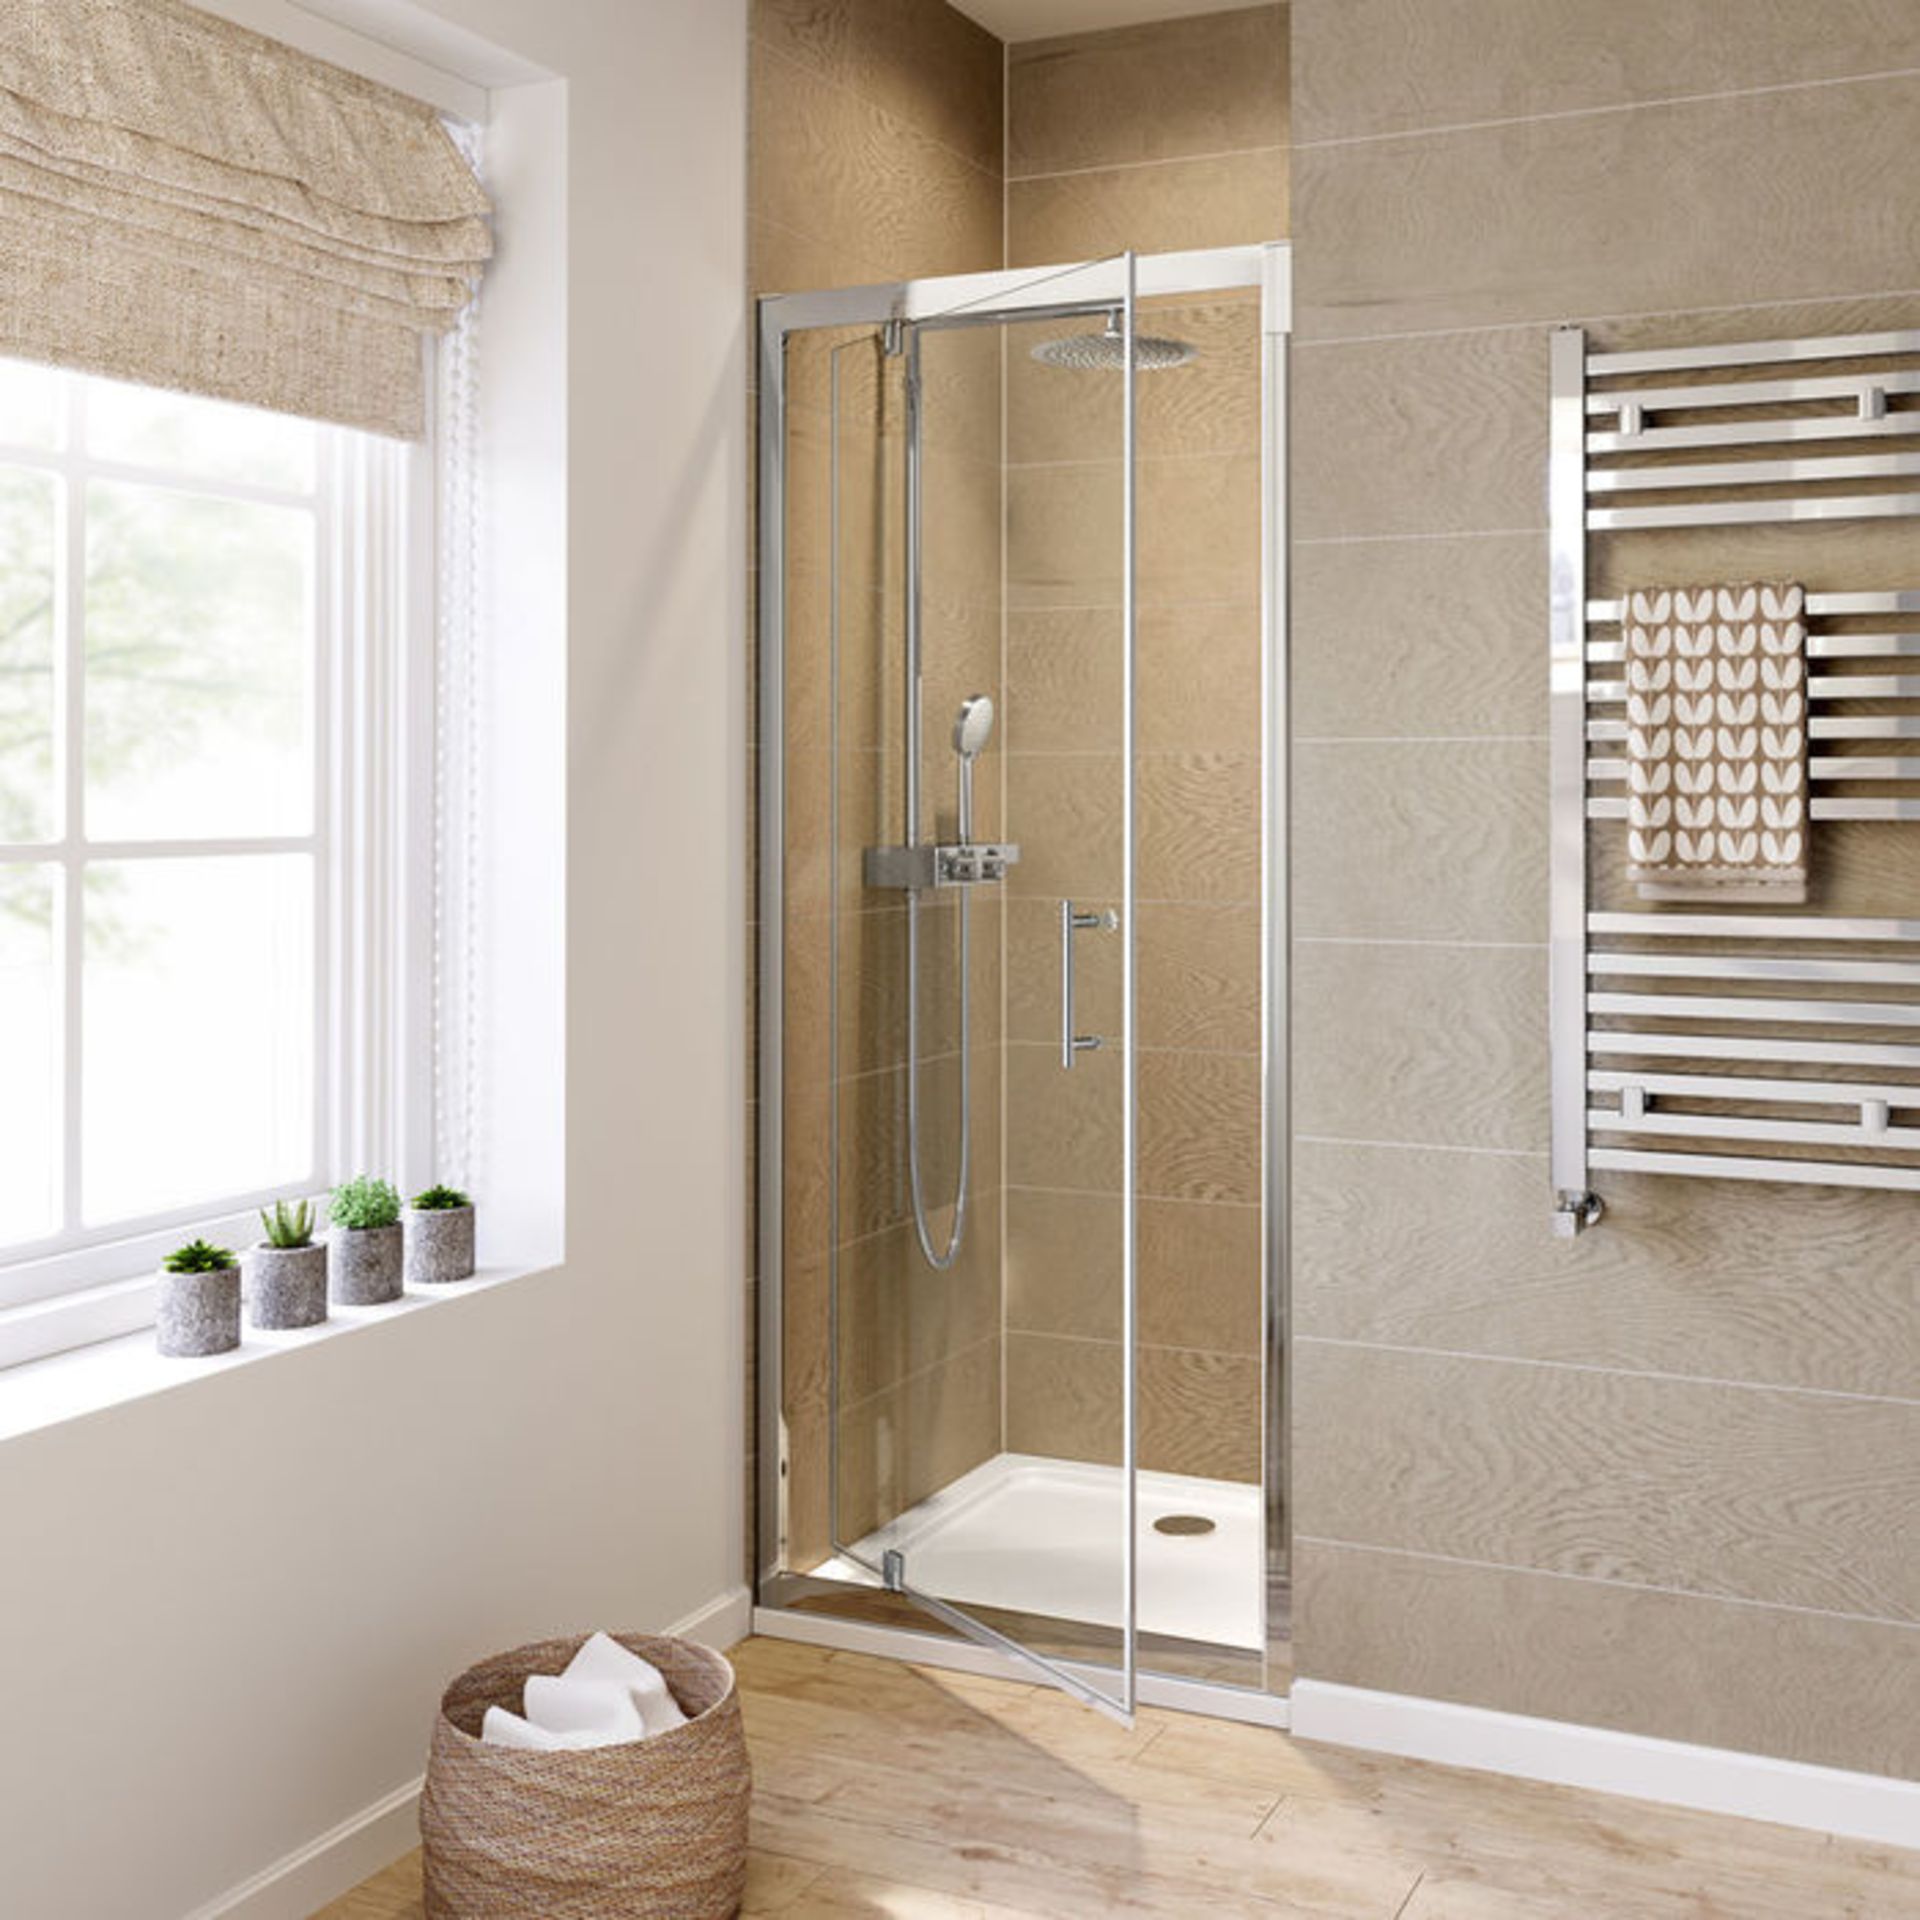 (EW126) 800mm - 6mm Elements Pivot Shower Door. RRP £299.99. 6mm Safety Glass Fully waterproof - Image 2 of 3